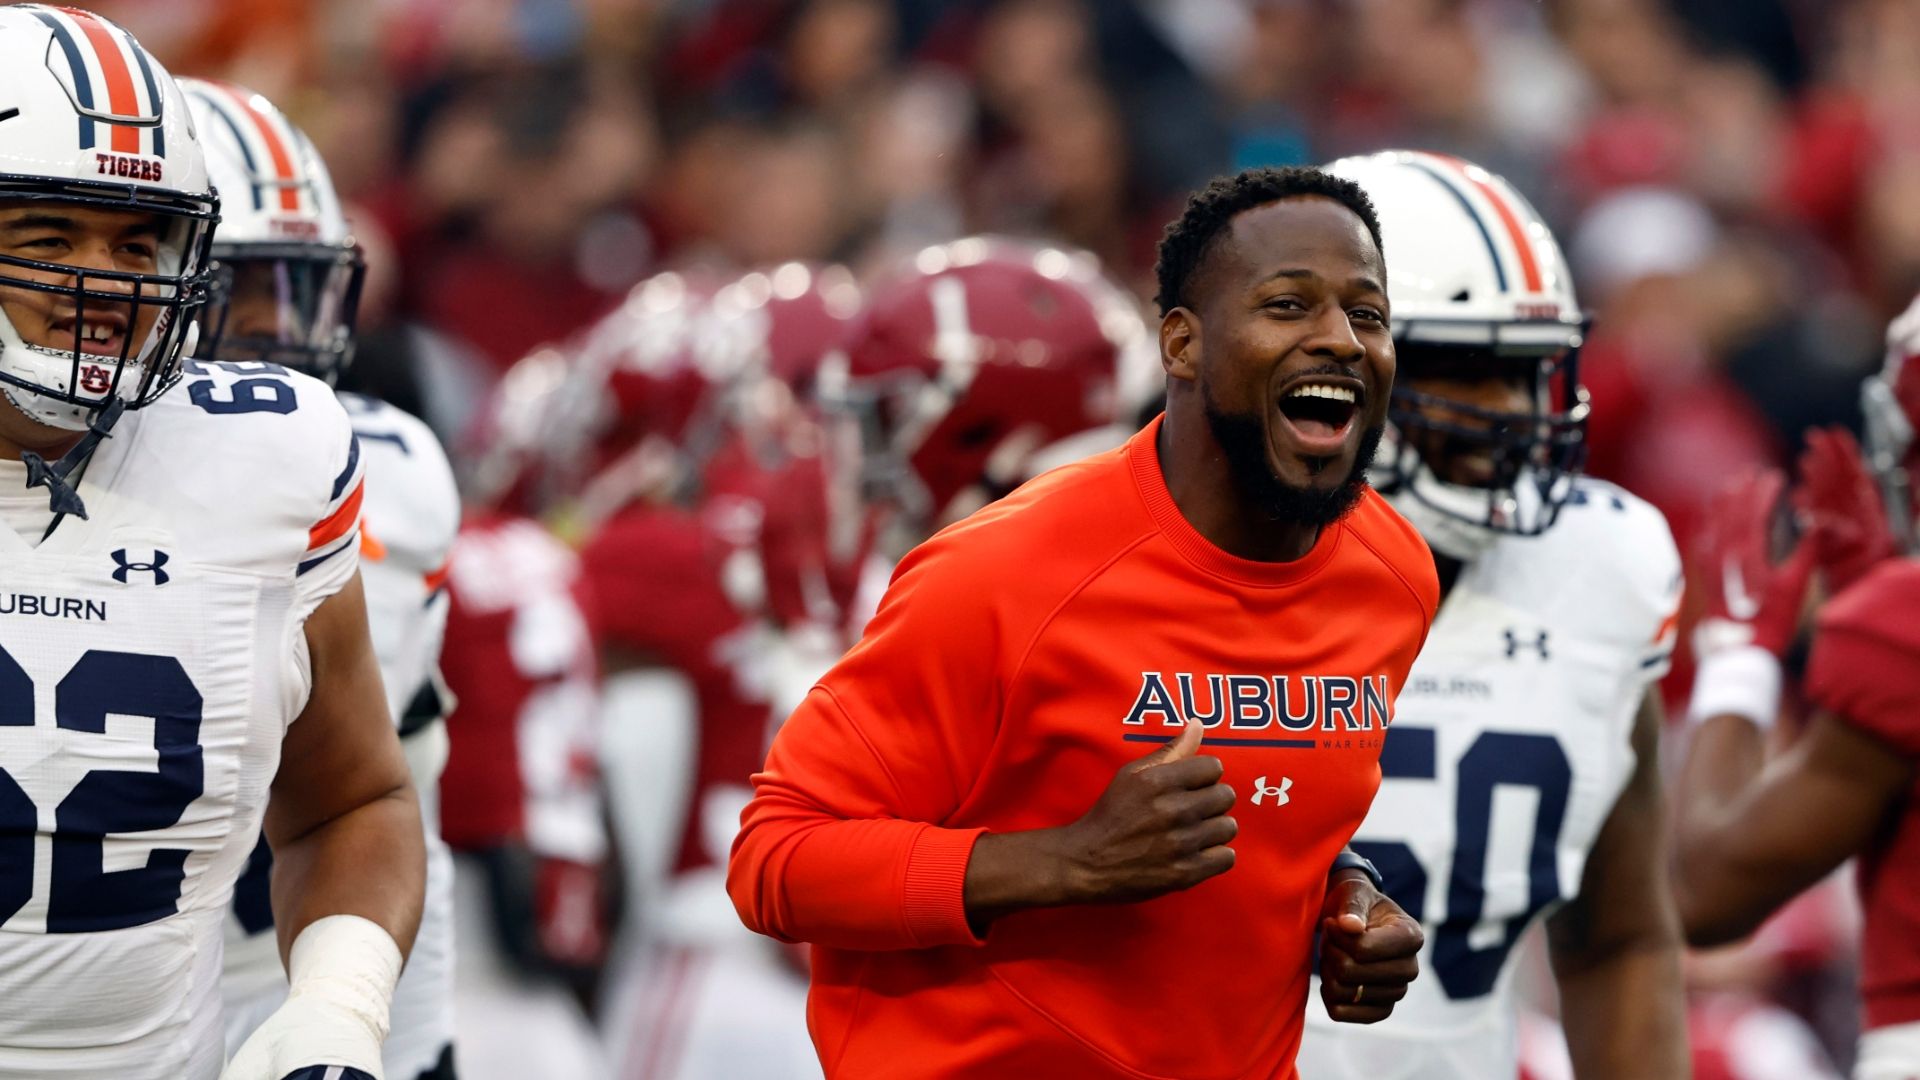 Auburn's Freeze says keeping Williams was priority